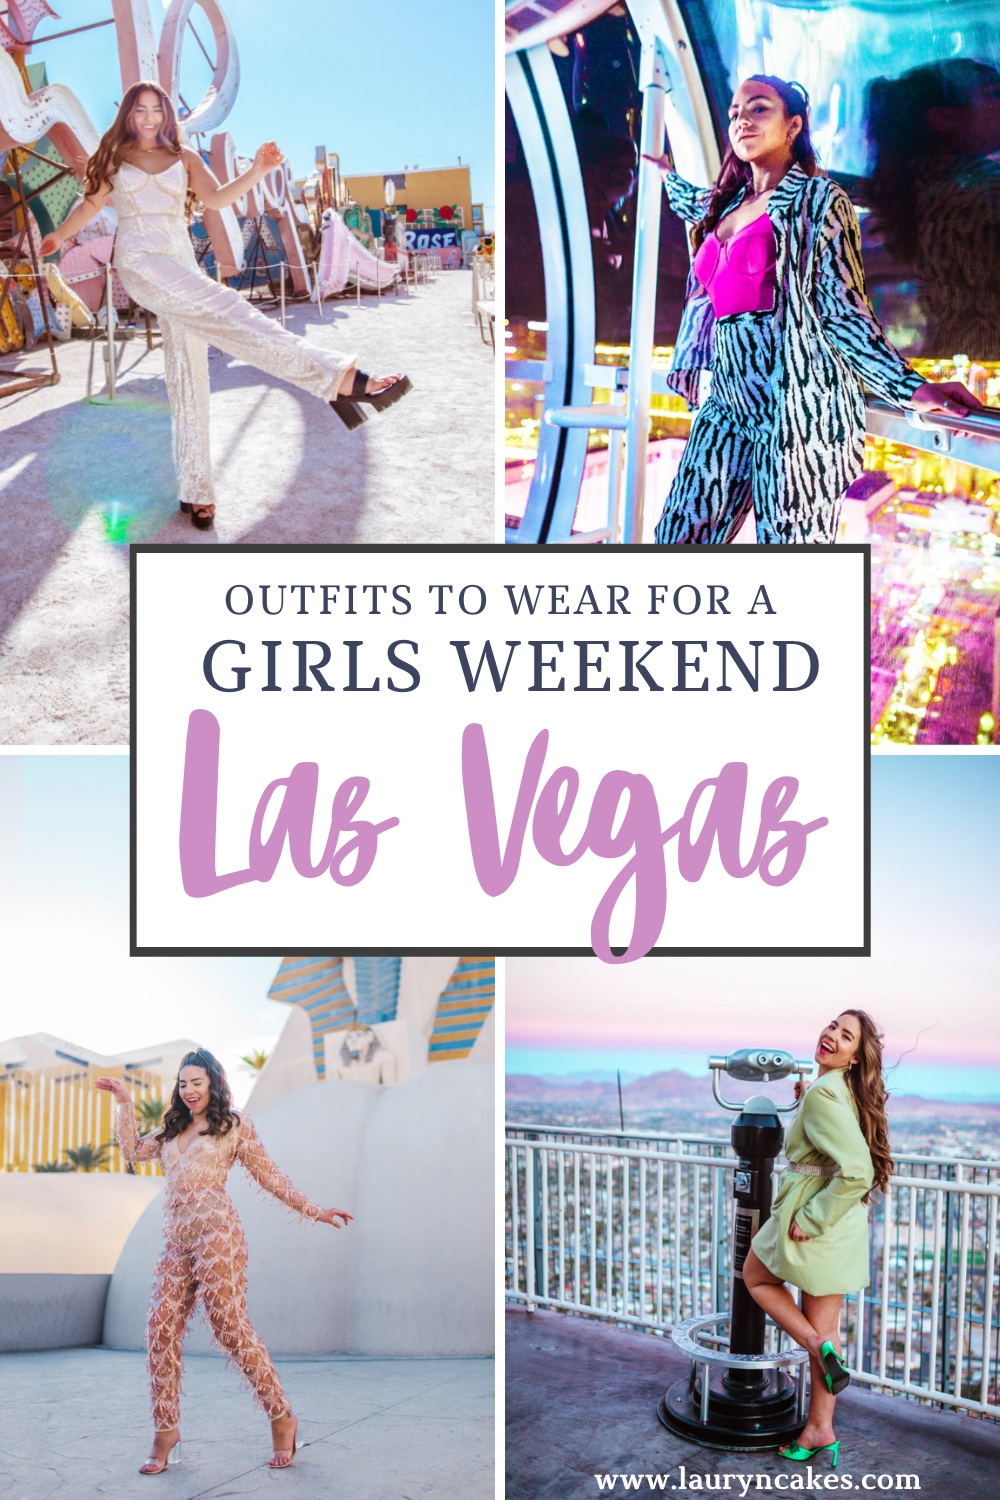 collages of four photos featuring style blogger and fashion influencer Lauryncakes in vegas clothing. Text over the images says, :outfits to wear for a girls weekend in Las Vegas"